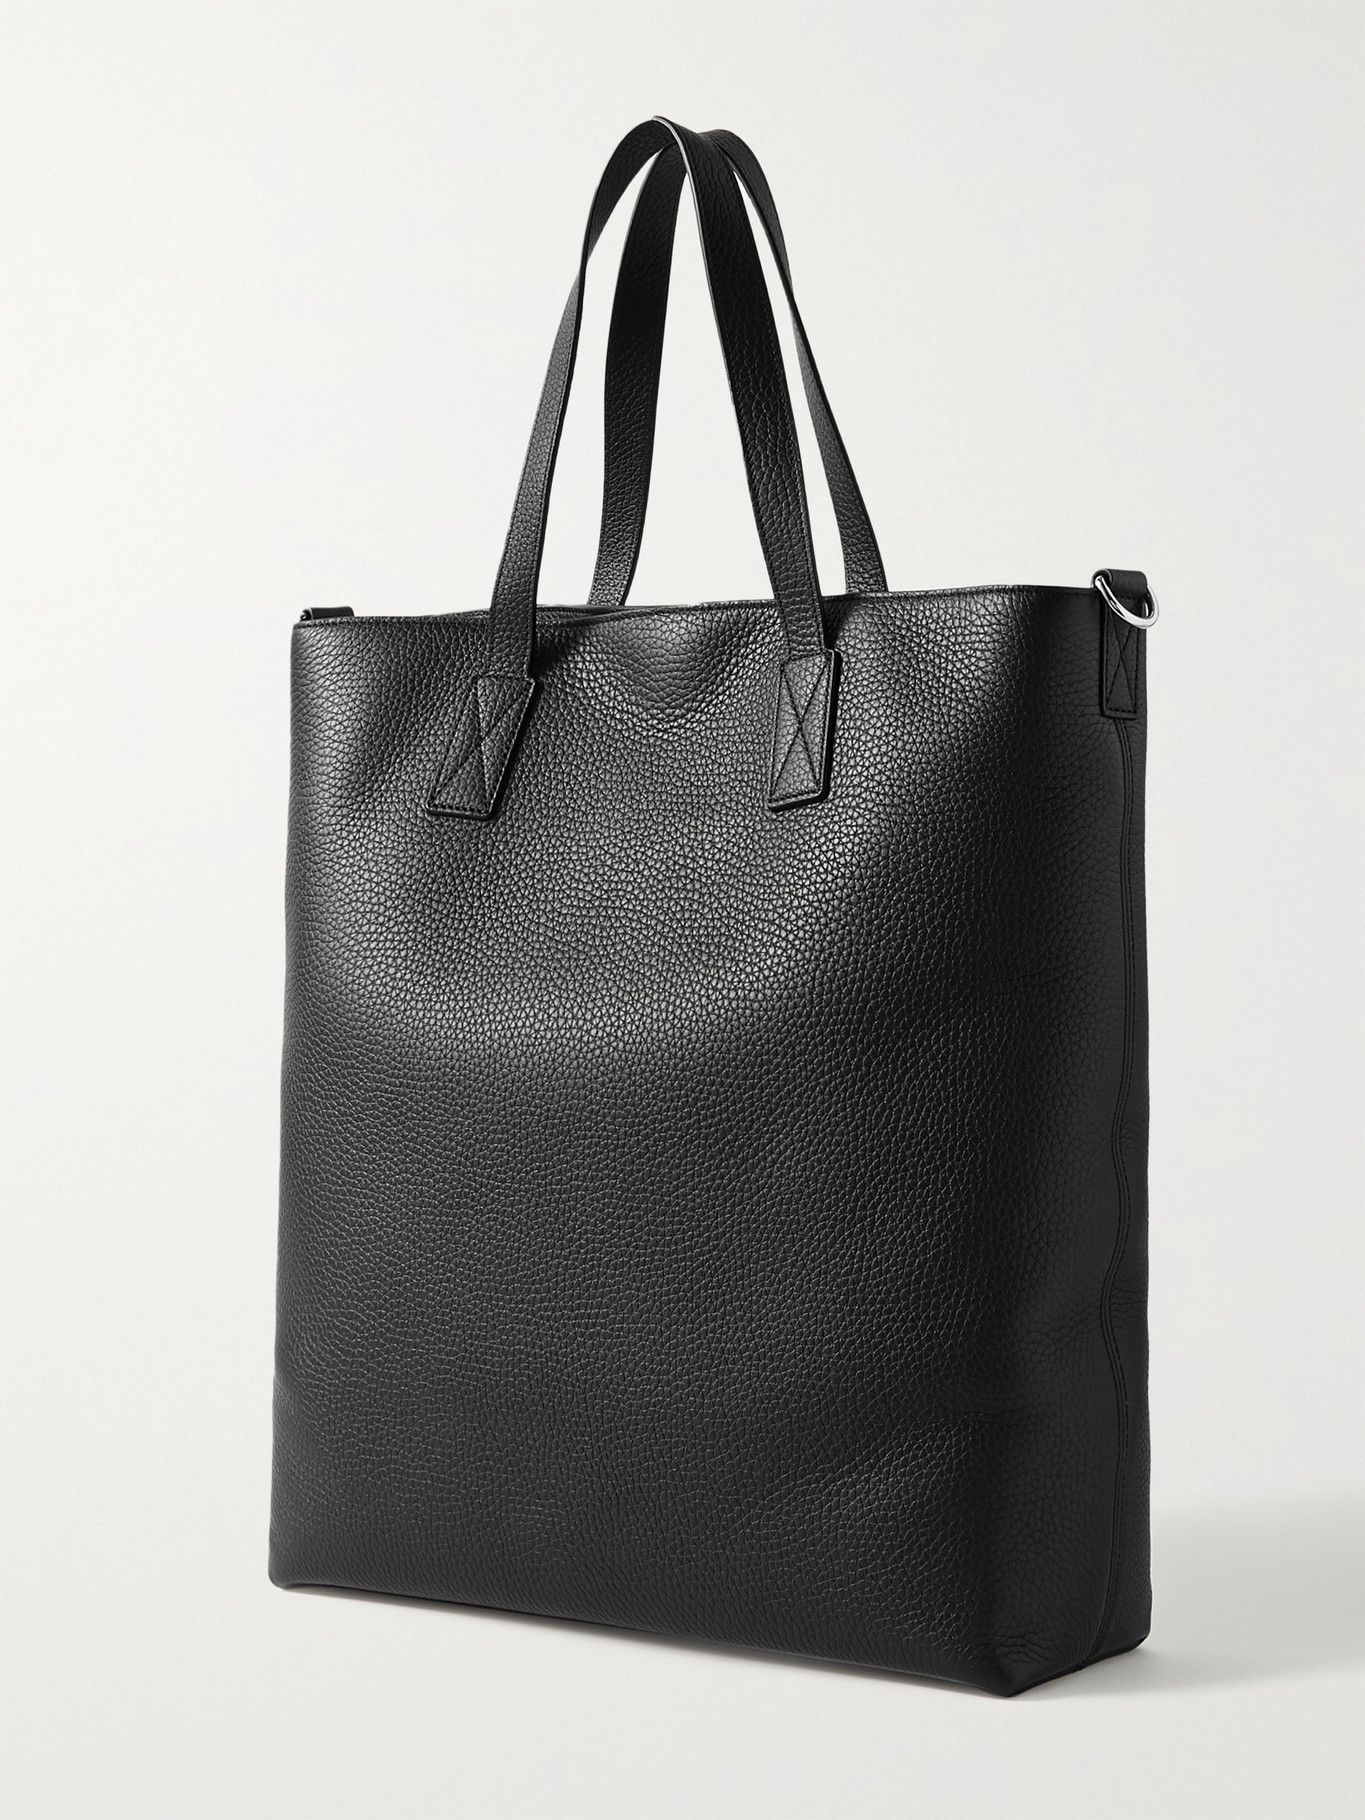 MULBERRY - Bryn Full-Grain Leather Tote Bag Mulberry